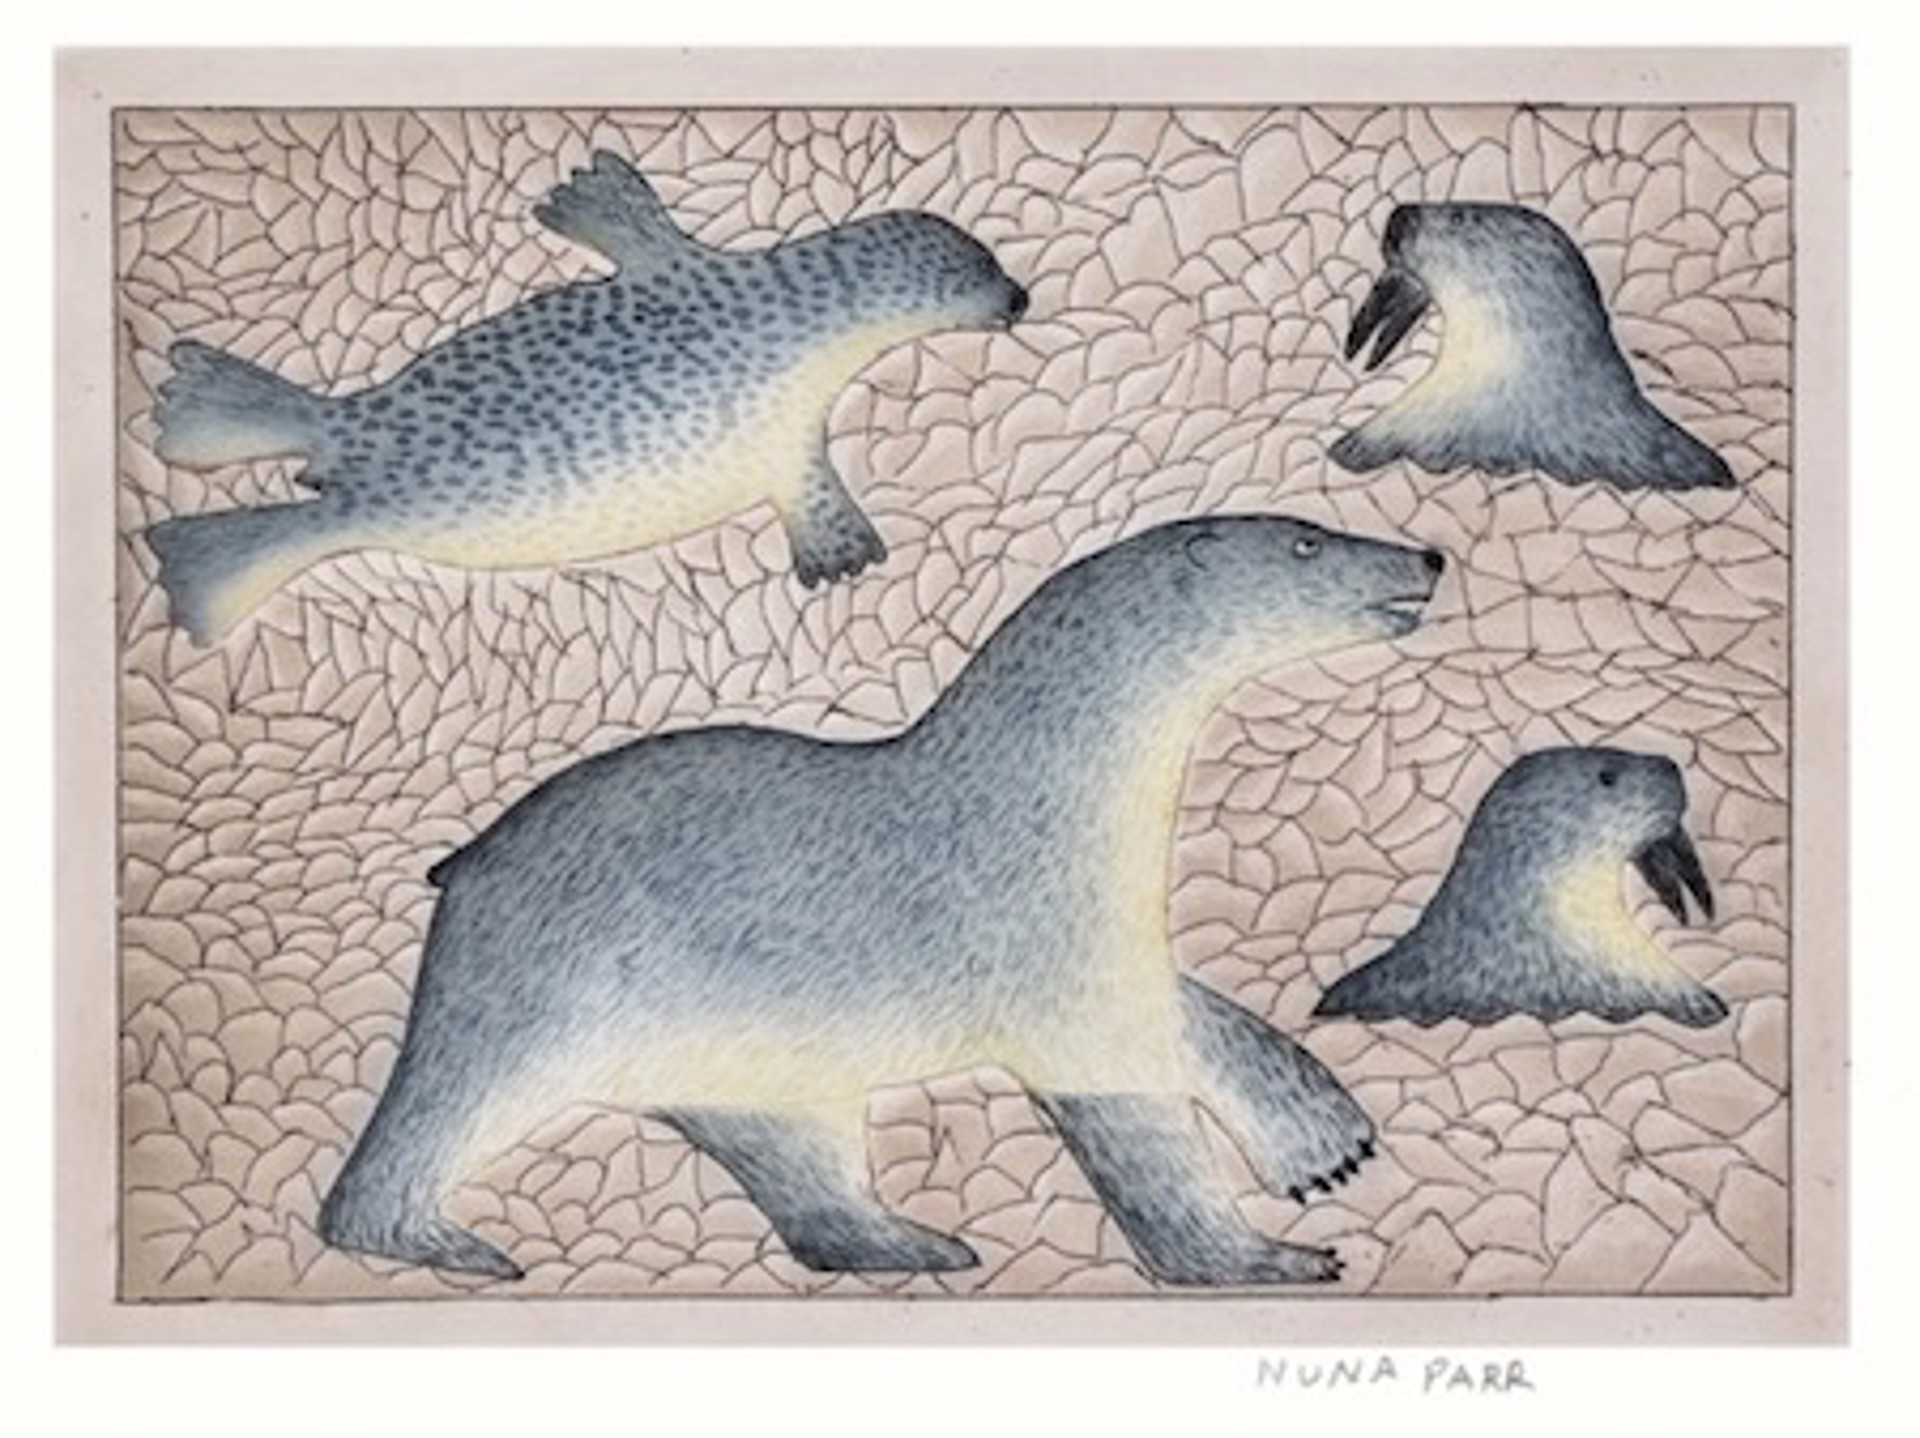 Inuit: Hunting Bear by Nuna Parr